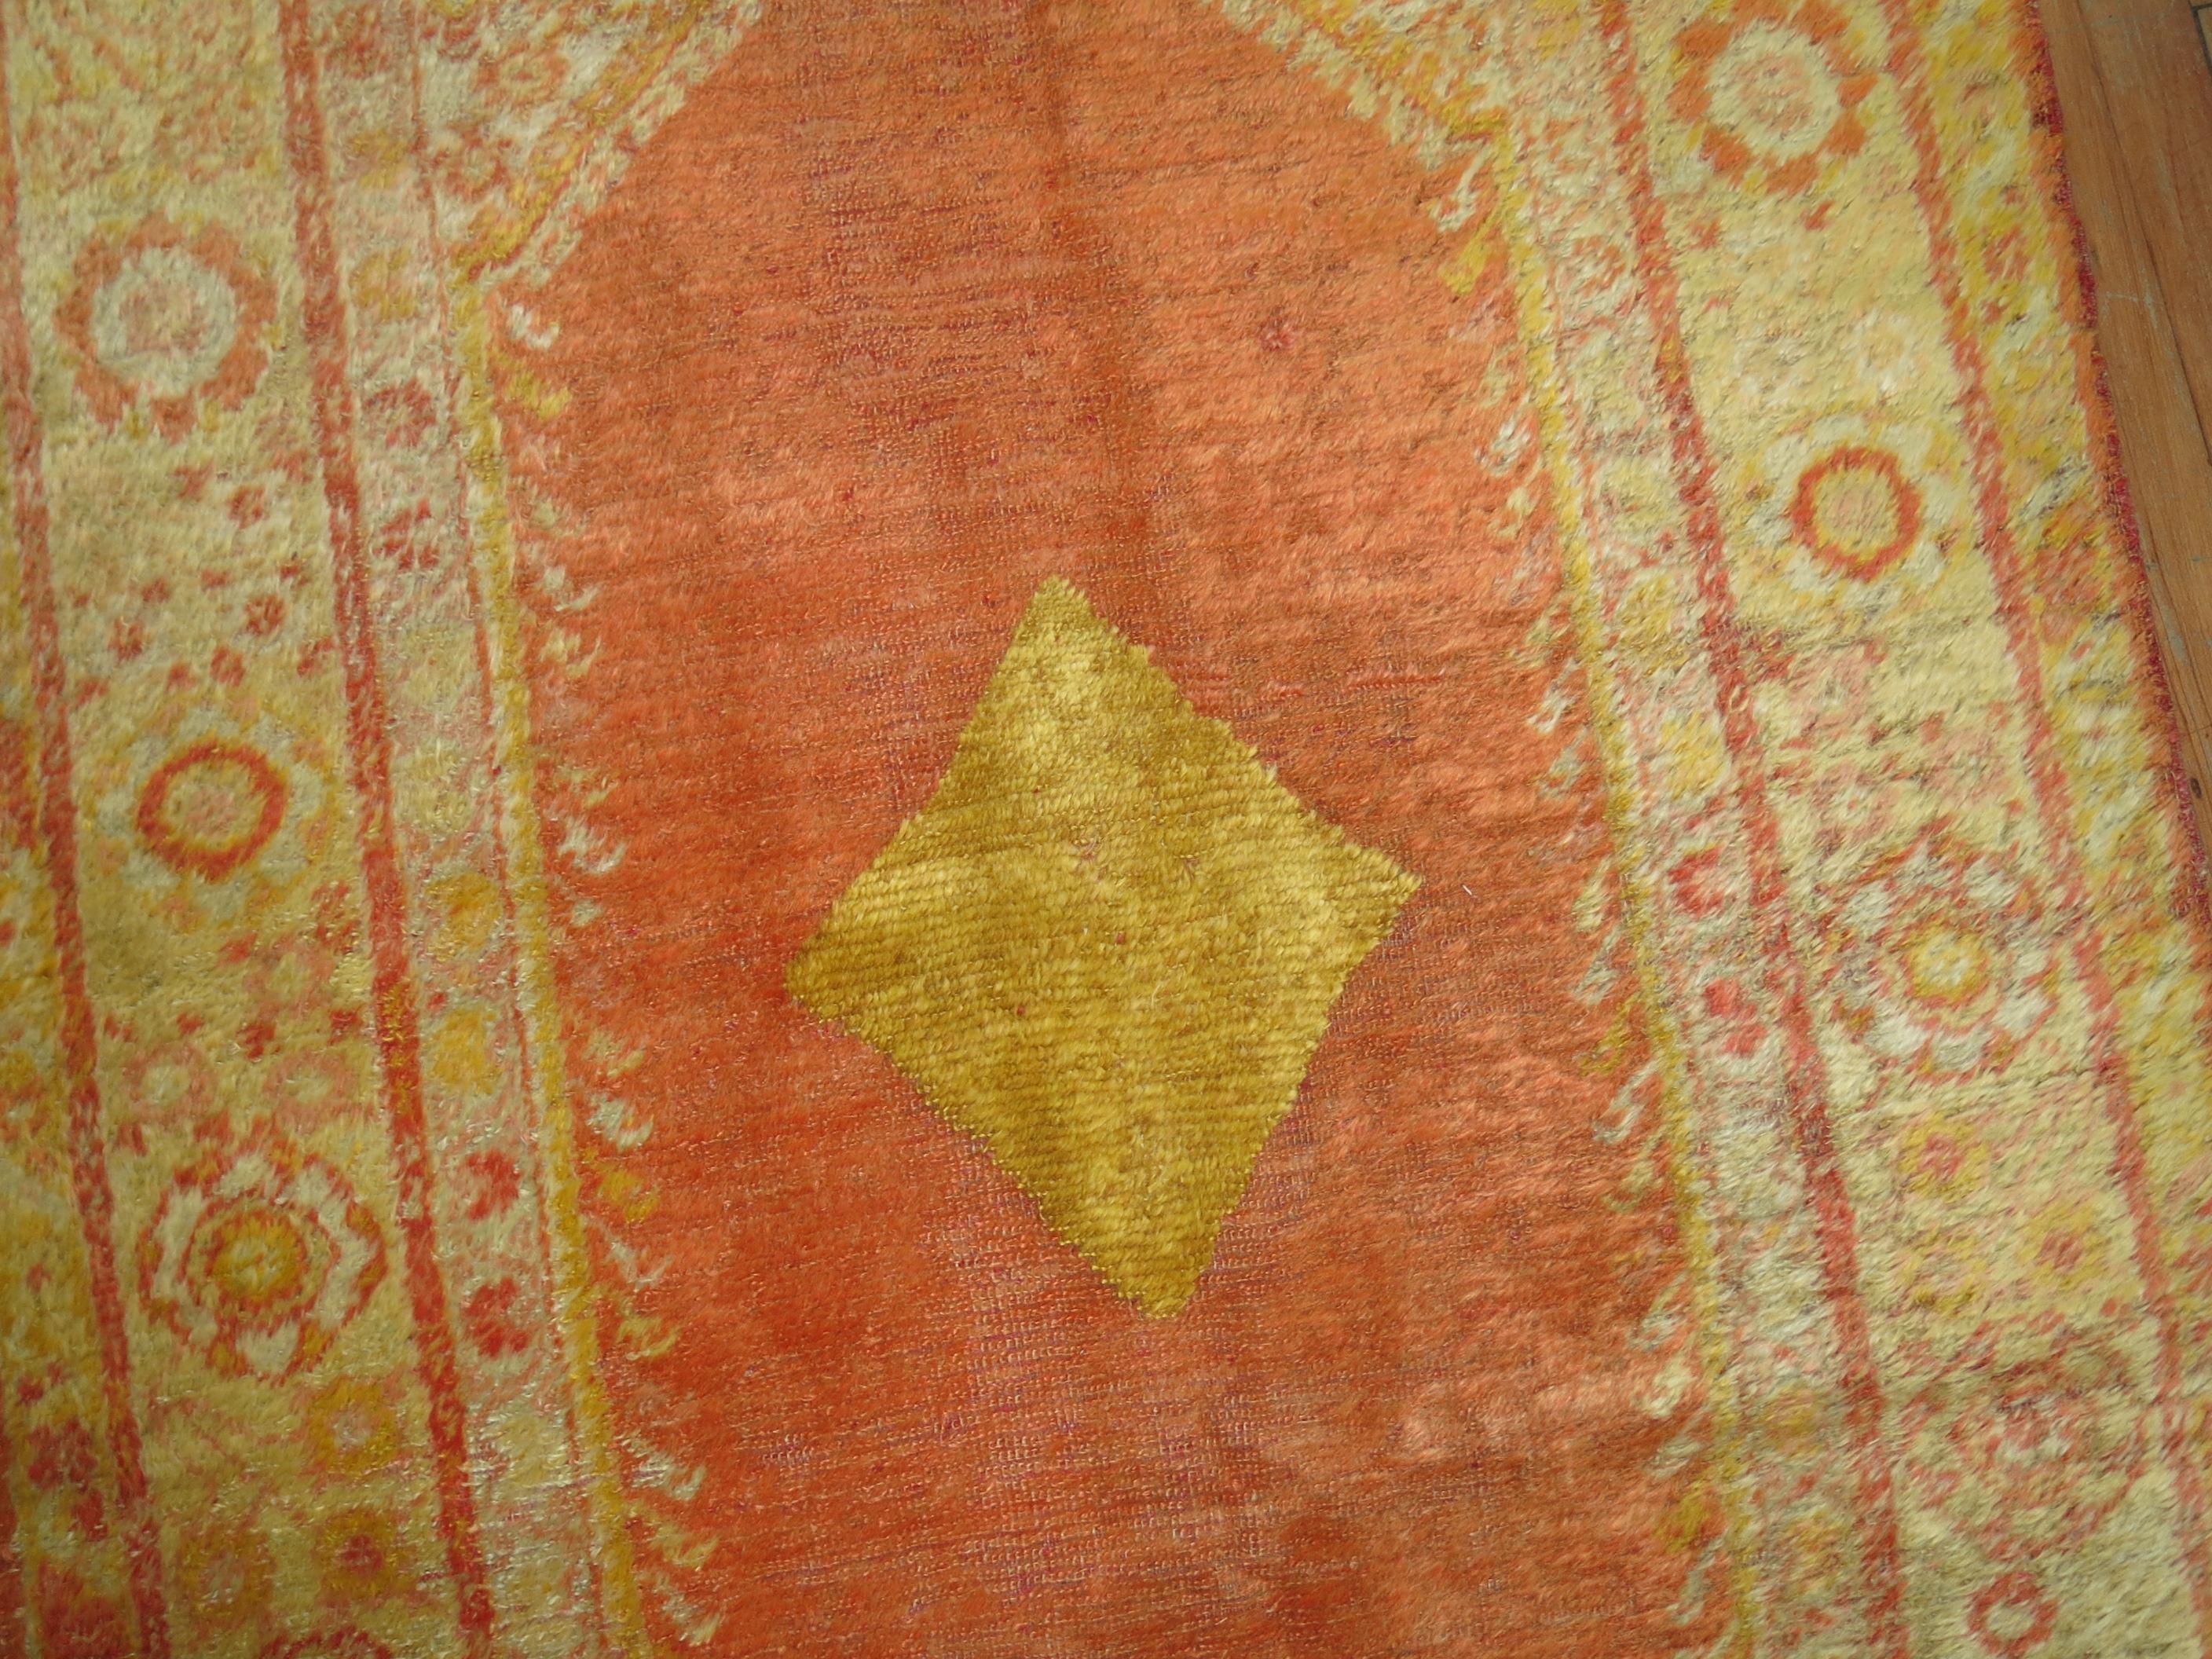 An early 20th century angora wool Oushak rug with a orange peel field accents in honey, warm red and ivory. This is a genuine piece woven with angora goat wool and its an antique. There is no noticeable repairs or any significant condition issues at